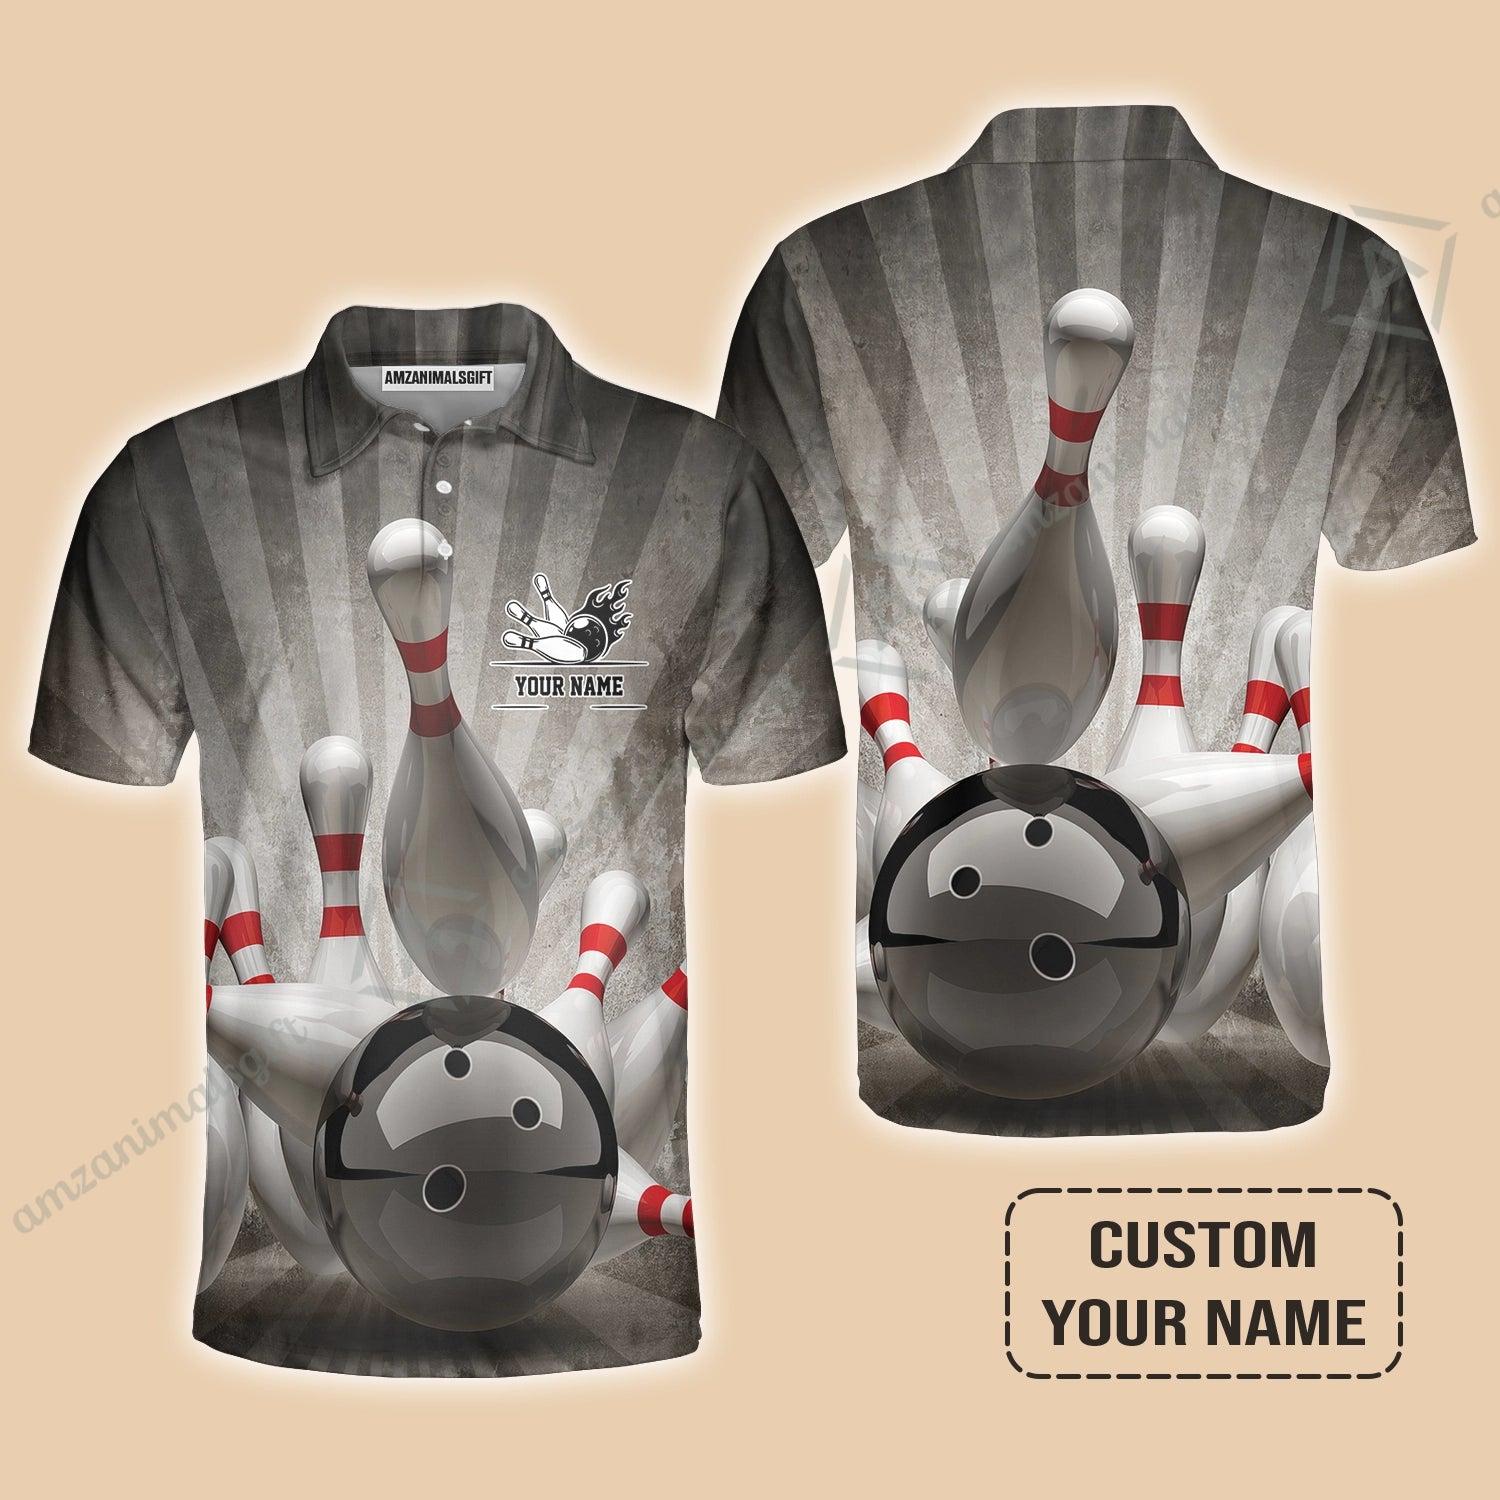 Customized Name Bowling Polo Shirt, Bowling Apparel For Men And Women, Bowling Team - Perfect Outfit For Bowling Lovers, Bowlers